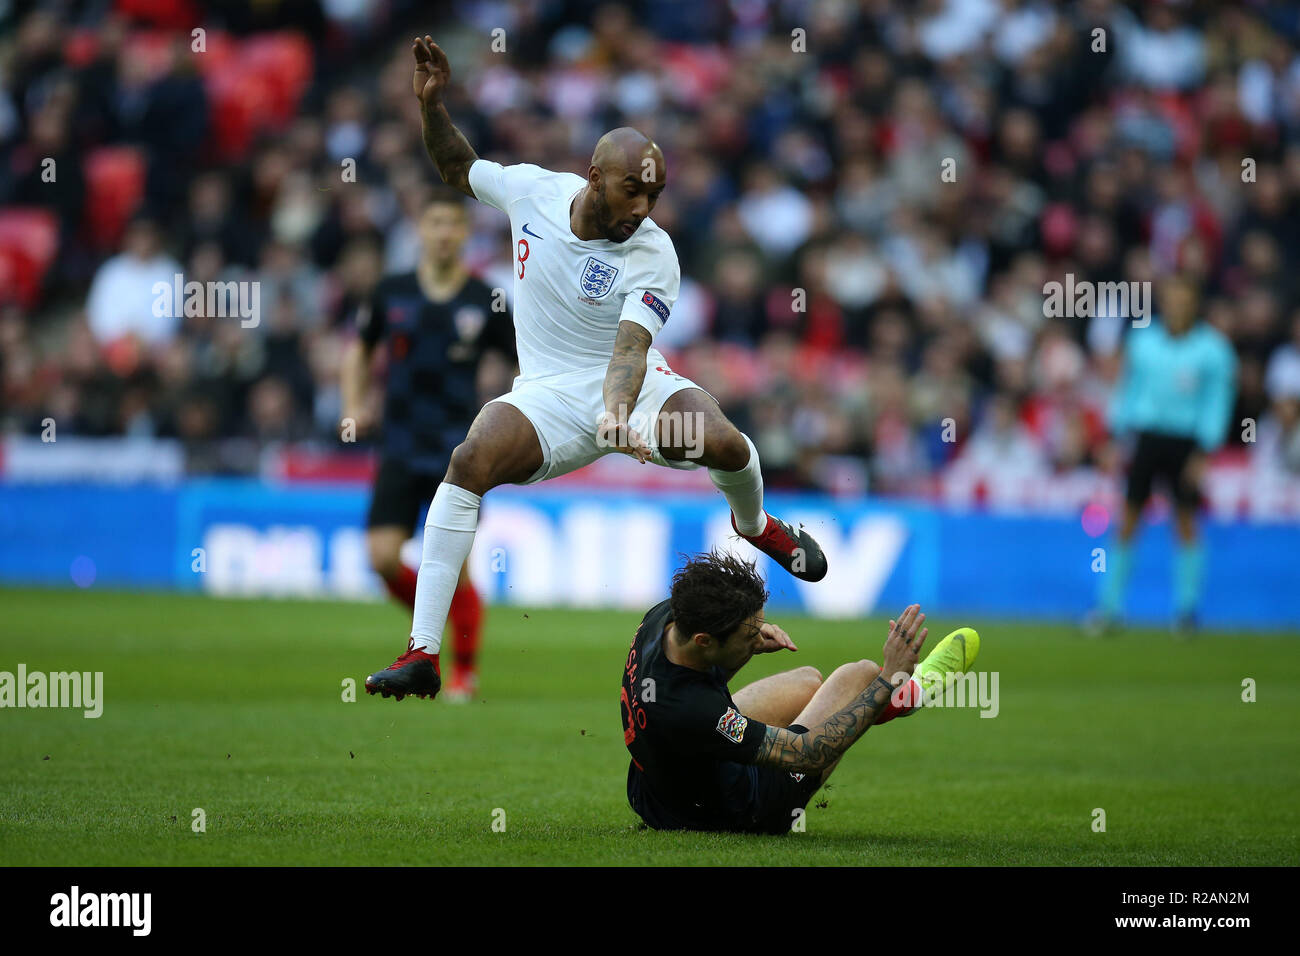 London, UK. 18th November 2018. London, UK. 18th November 2018. Fabian Delph of England is tackled by Sime Vrsaljko of Croatia.UEFA Nations league A, group 4 match, England v Croatia at Wembley Stadium in London on Sunday 18th November 2018.  Please note images are for Editorial Use Only. pic by Andrew Orchard/Alamy Live news Credit: Andrew Orchard sports photography/Alamy Live News Stock Photo